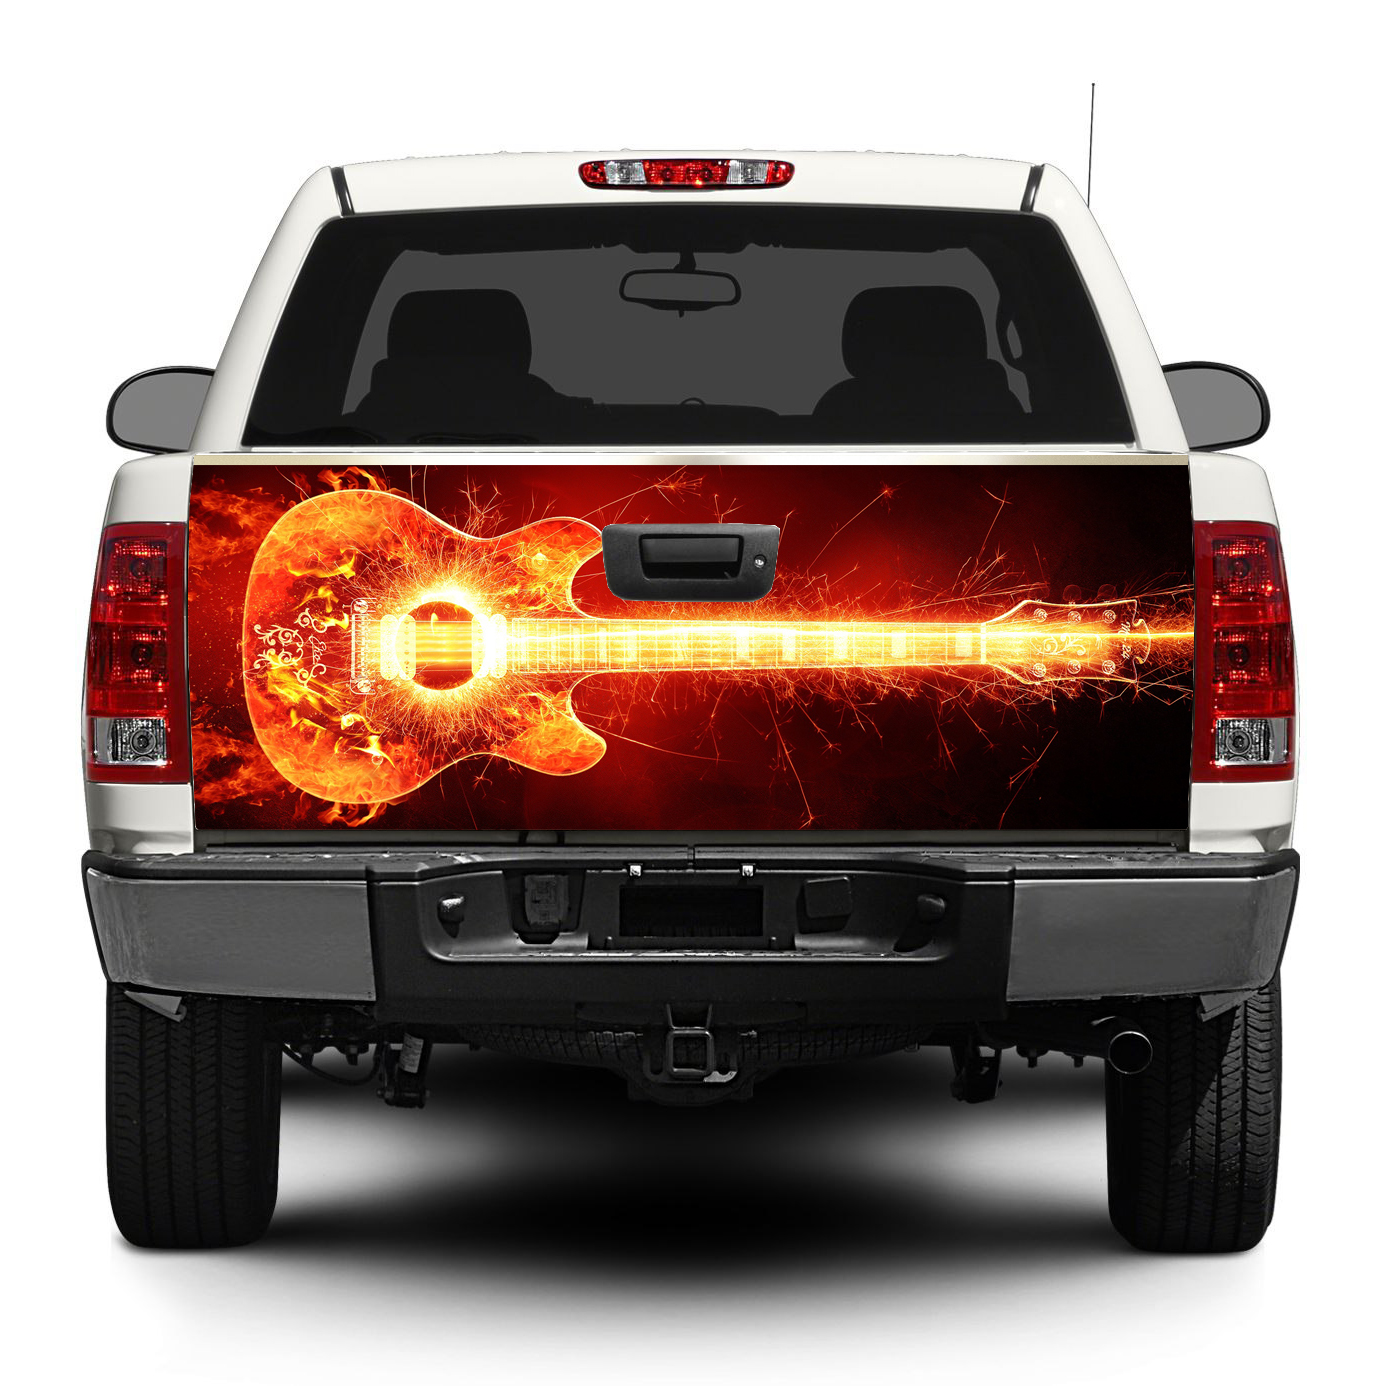 Guitar Buring rock music Tailgate Decal Sticker Wrap Pick-up Truck SUV Car